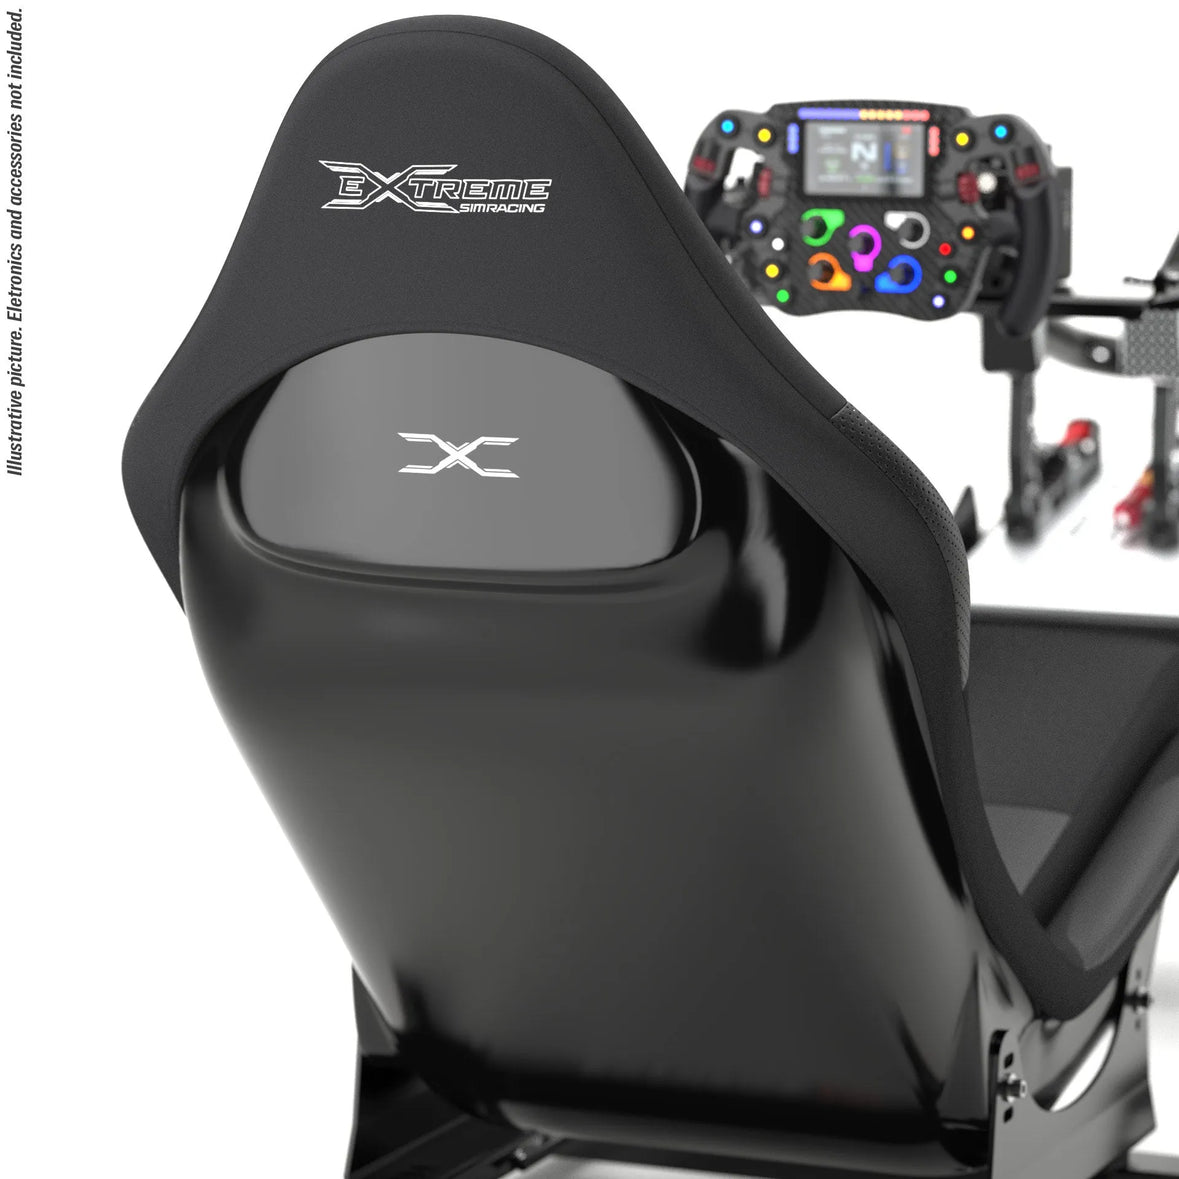 FX1 Formula Cockpit - Unboxing, Assembly, Adjustments and Demo by Extreme  Simracing 